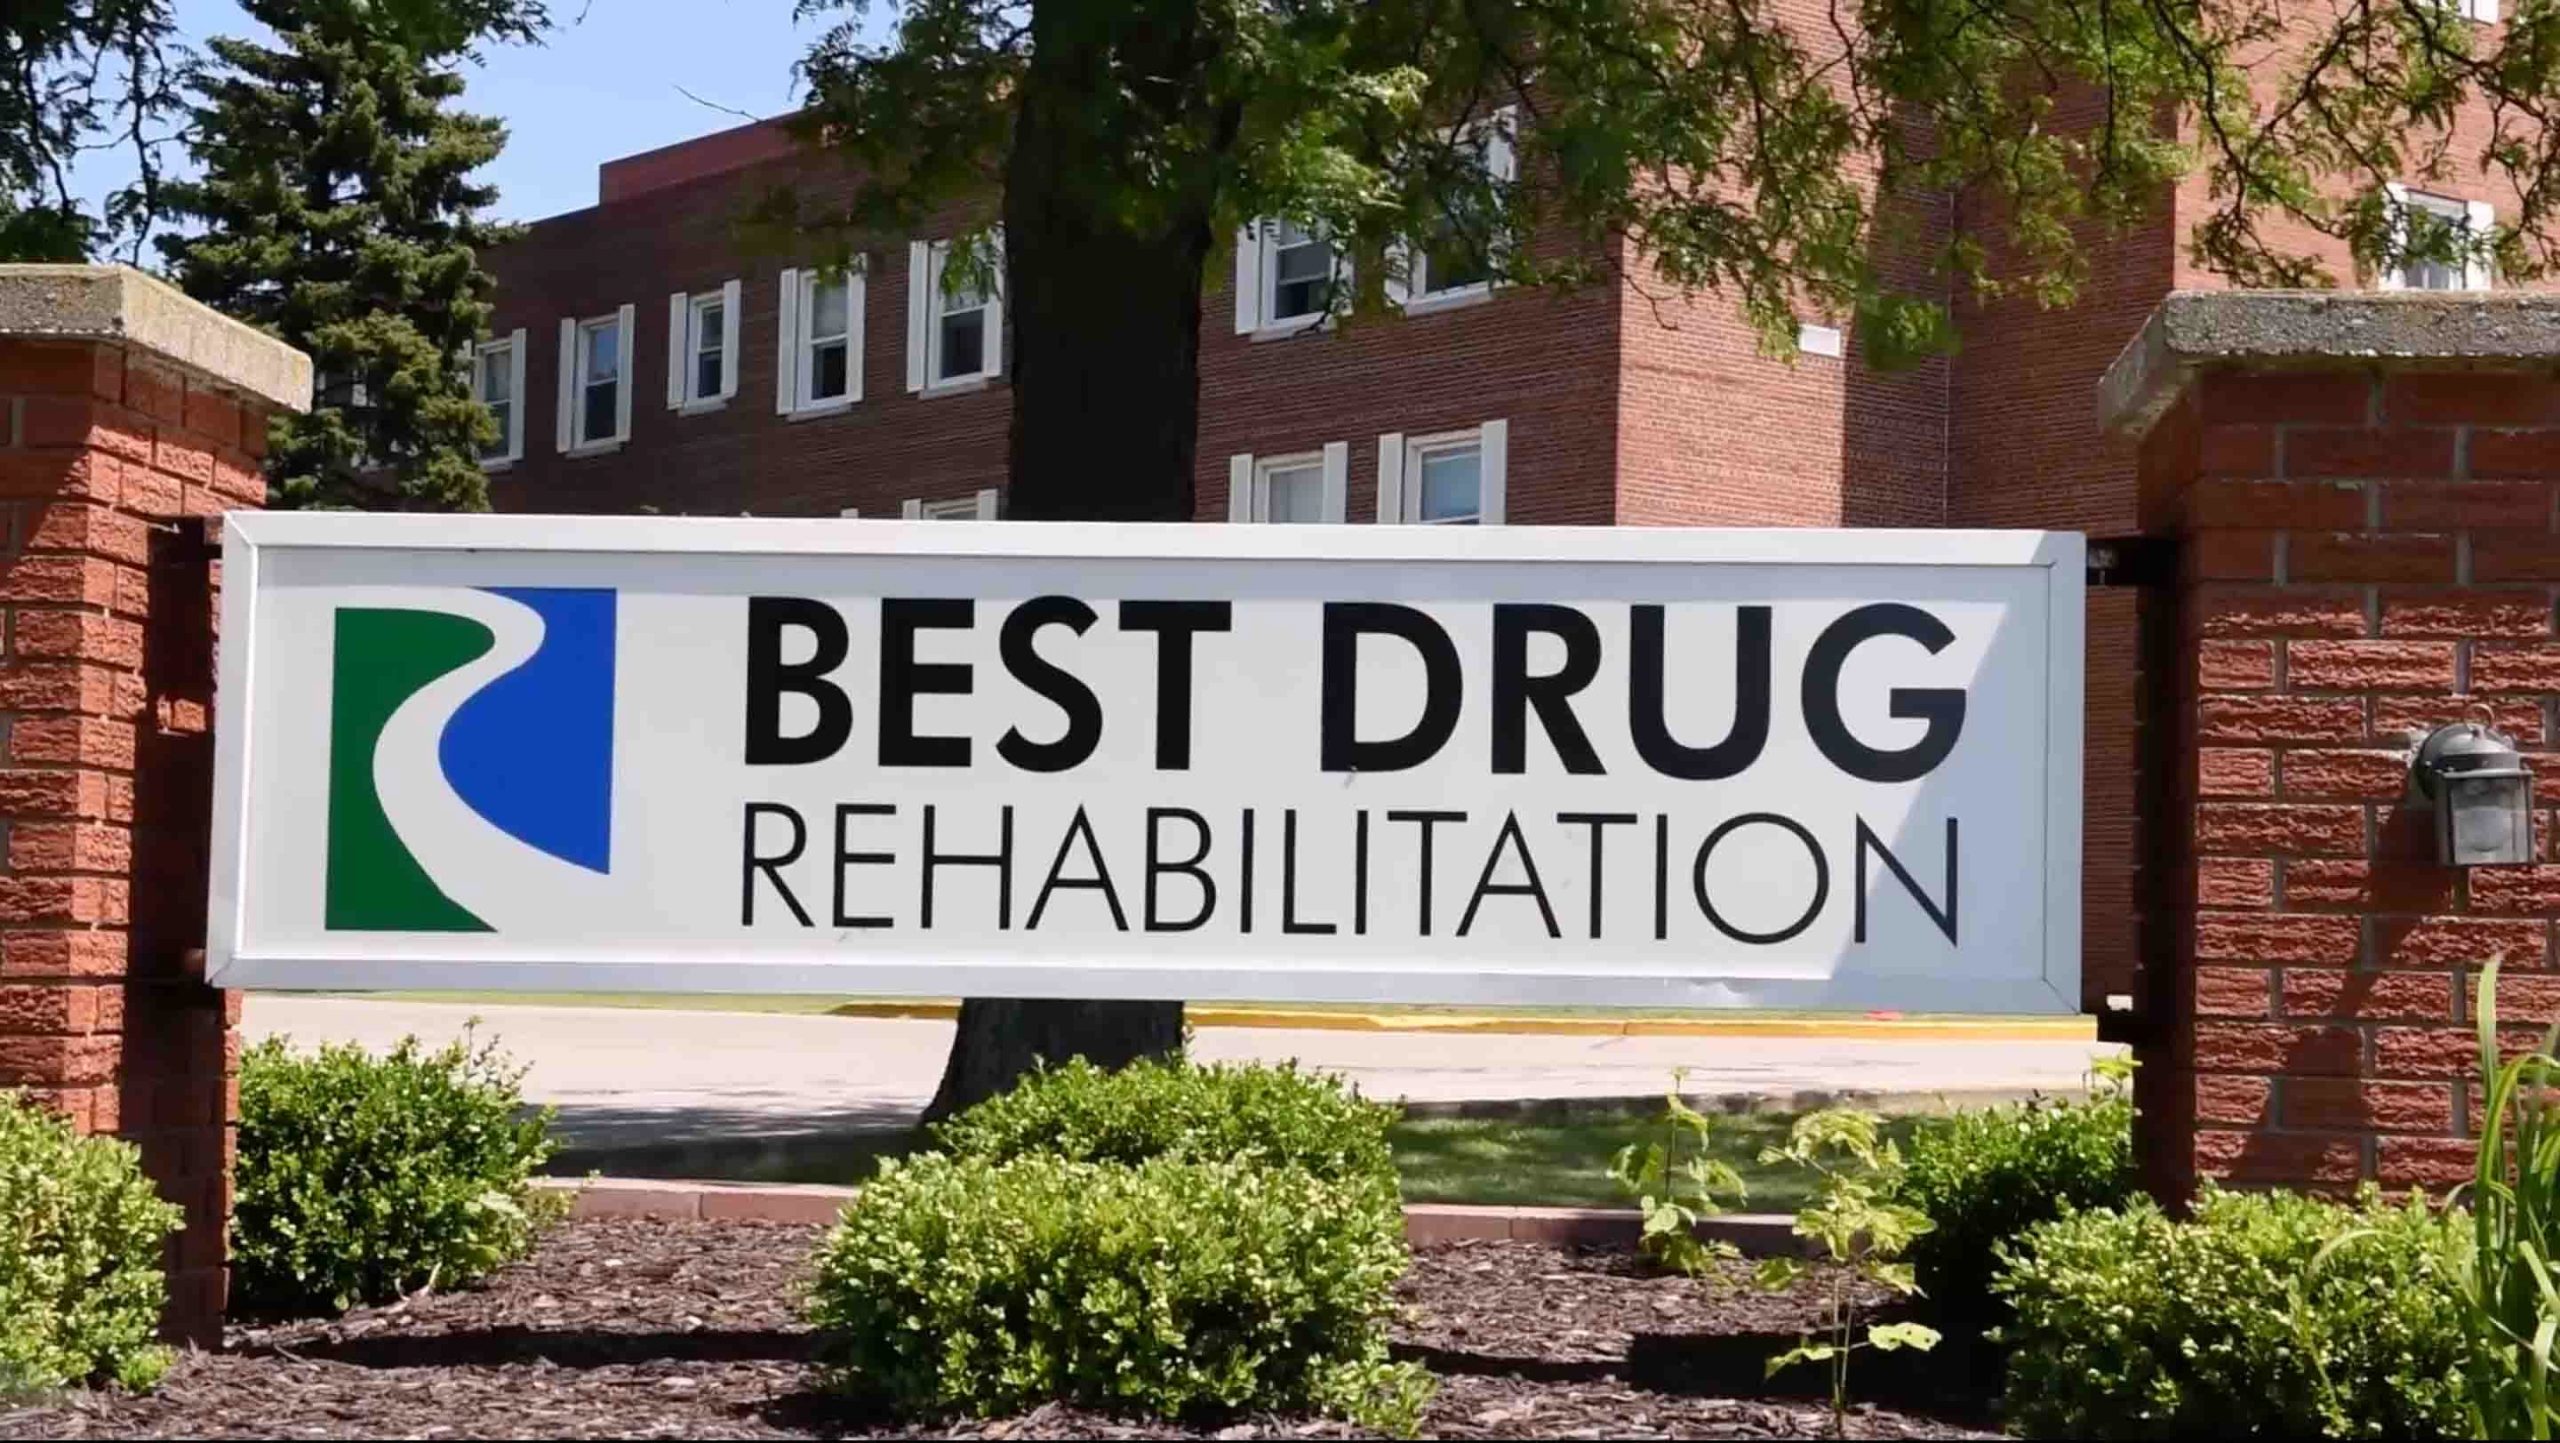 Astonishing benefits that a patient gets from Drug Rehab